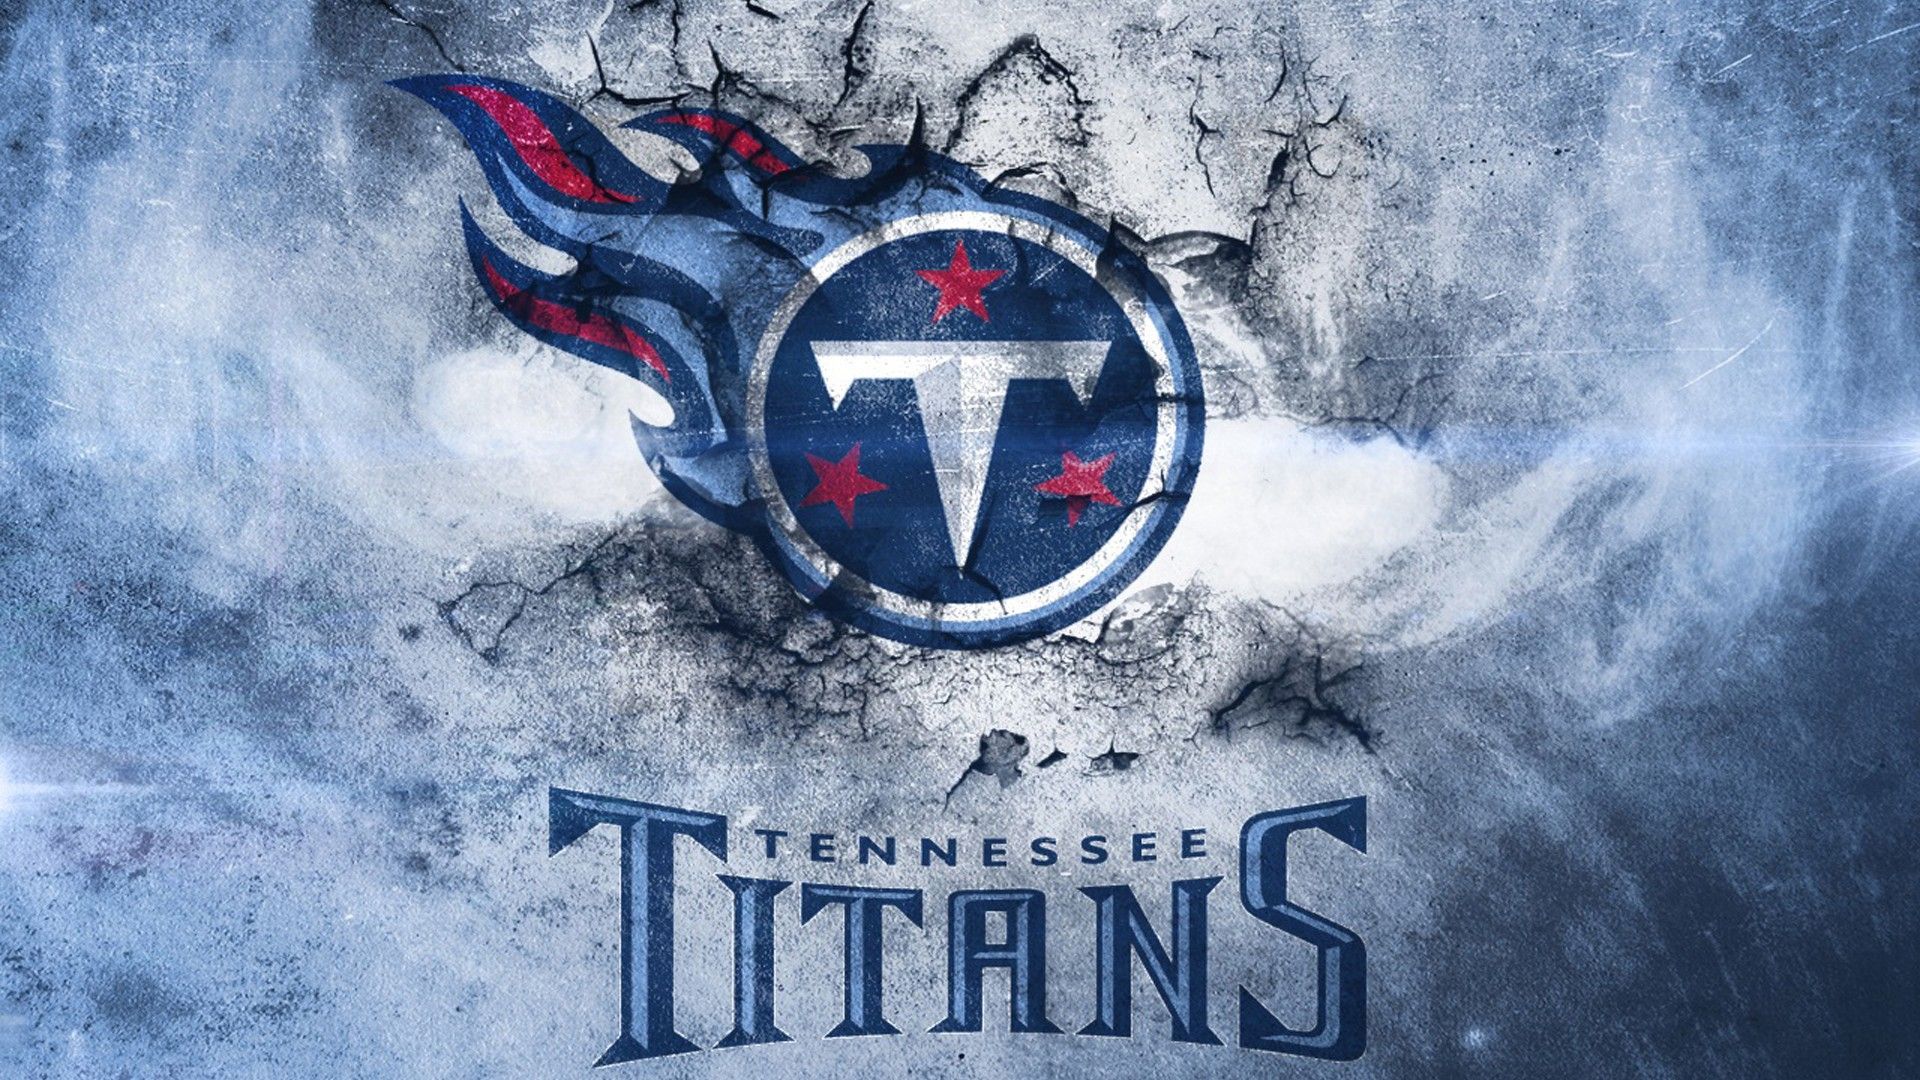 HD Tennessee Titans Background NFL Football Wallpaper. Tennessee titans football, Nfl football wallpaper, Titans football